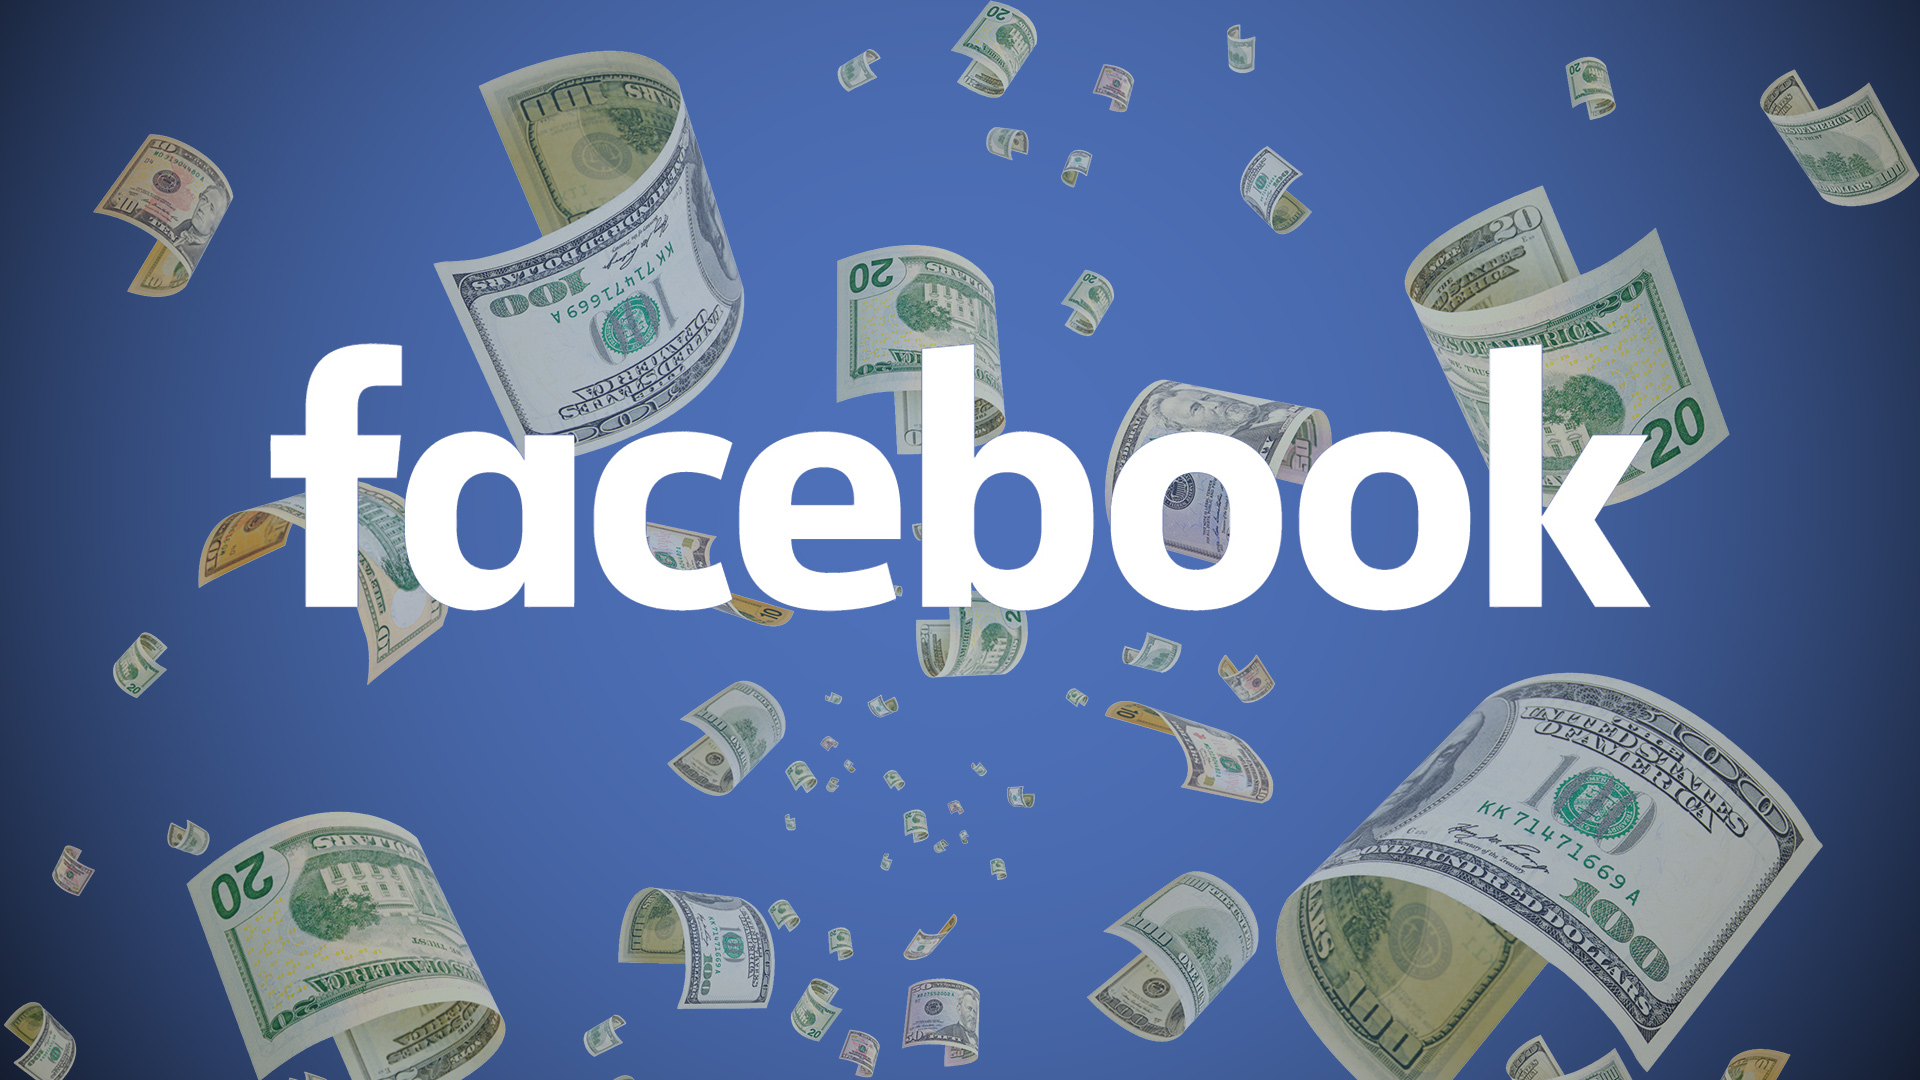 Facebook now has more than 5 million monthly advertisers